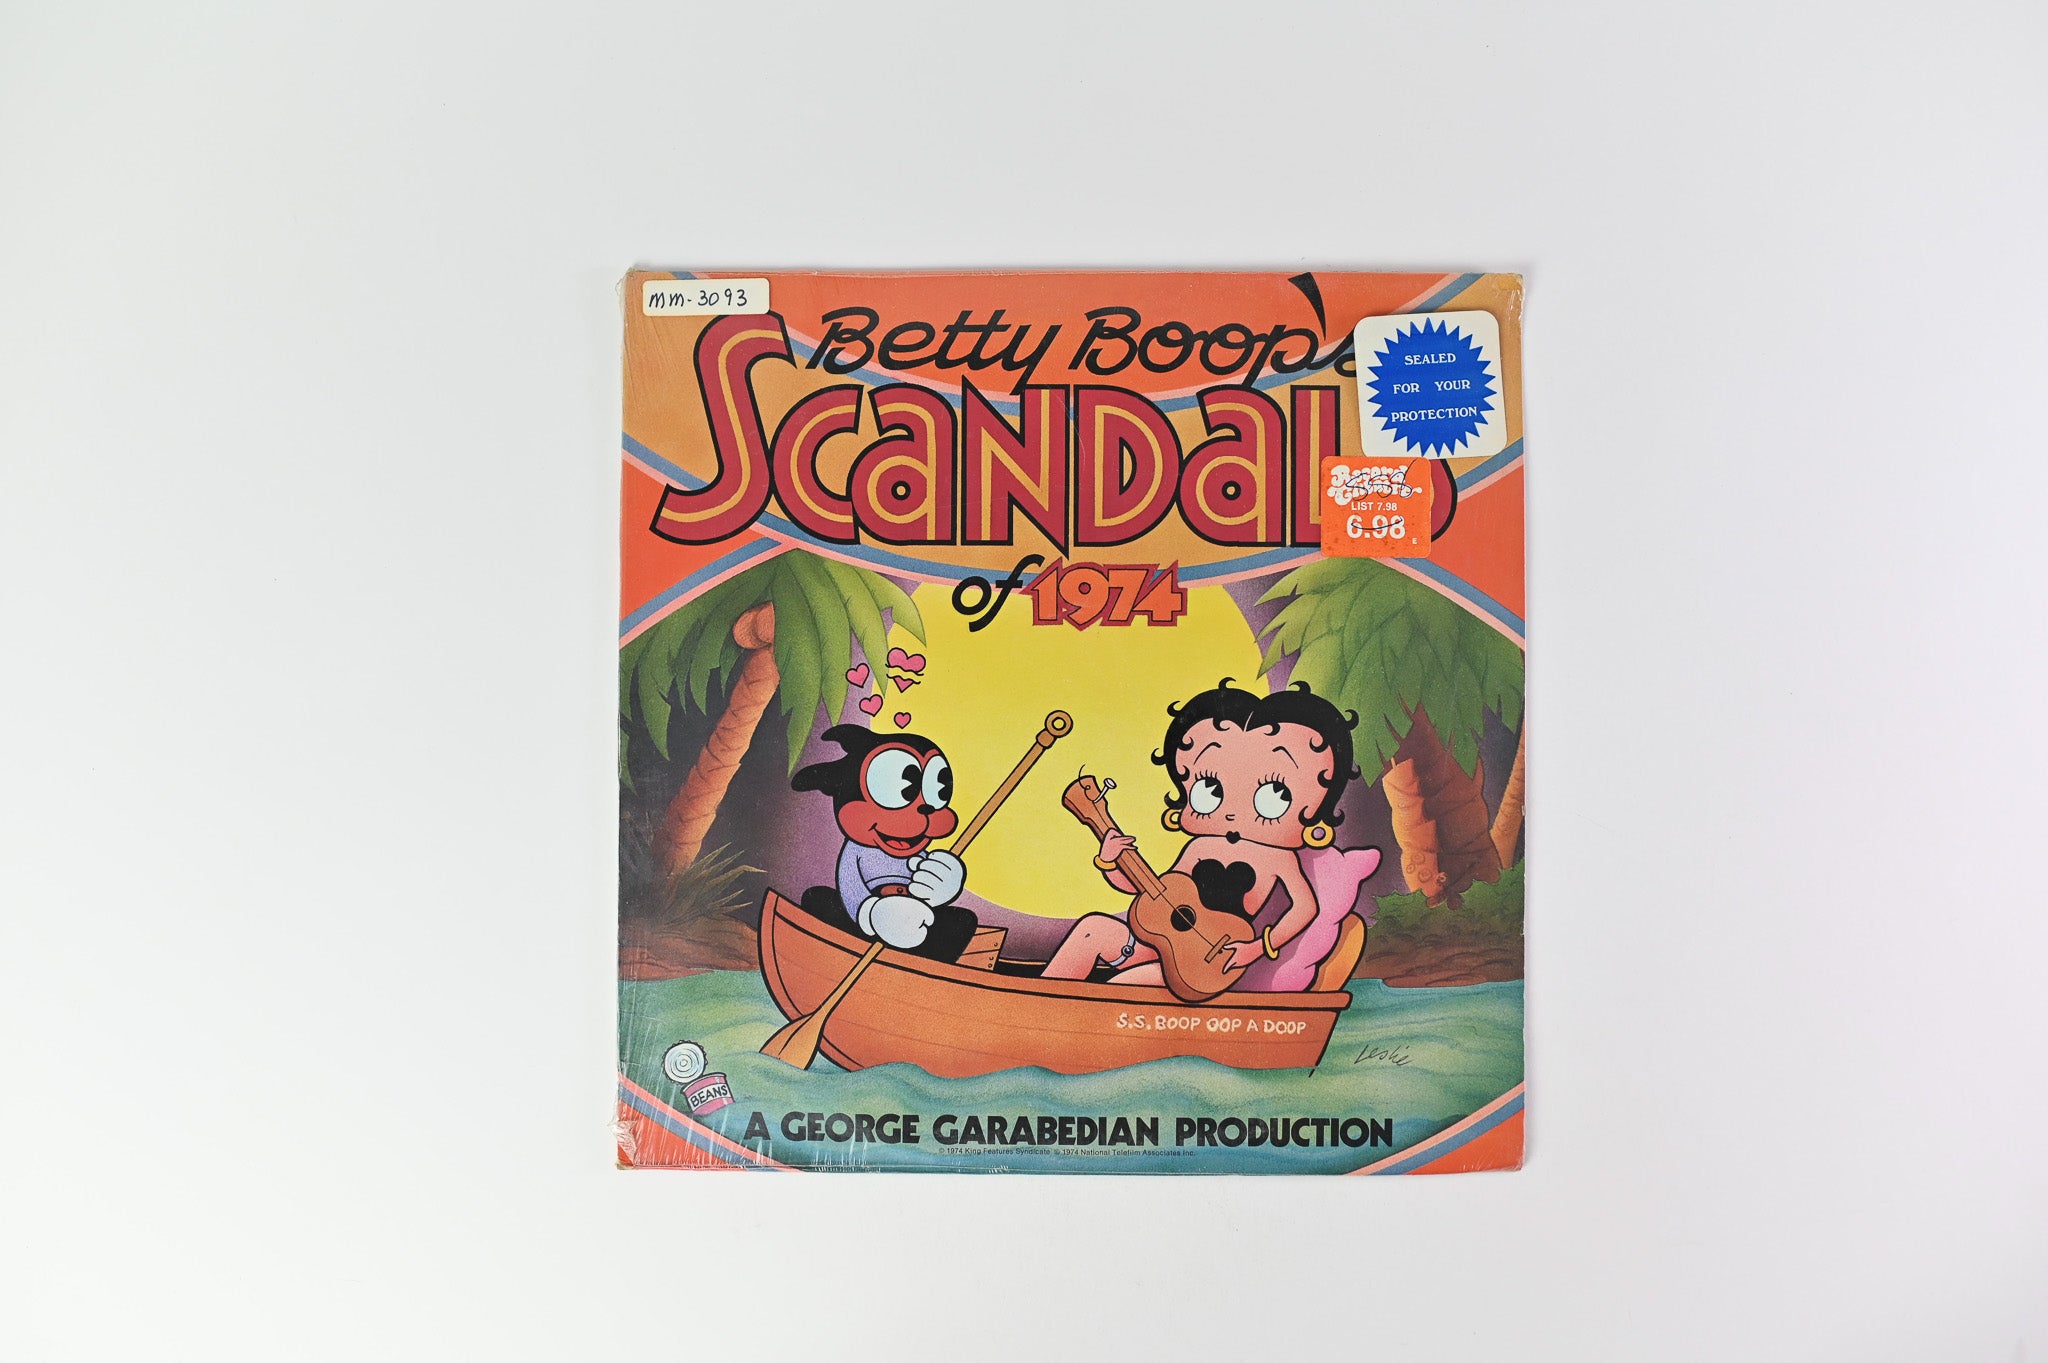 Mae Questel - Betty Boop - Scandals Of 1974 (Original Motion Picture Soundtrack) on Mark56 Records Sealed